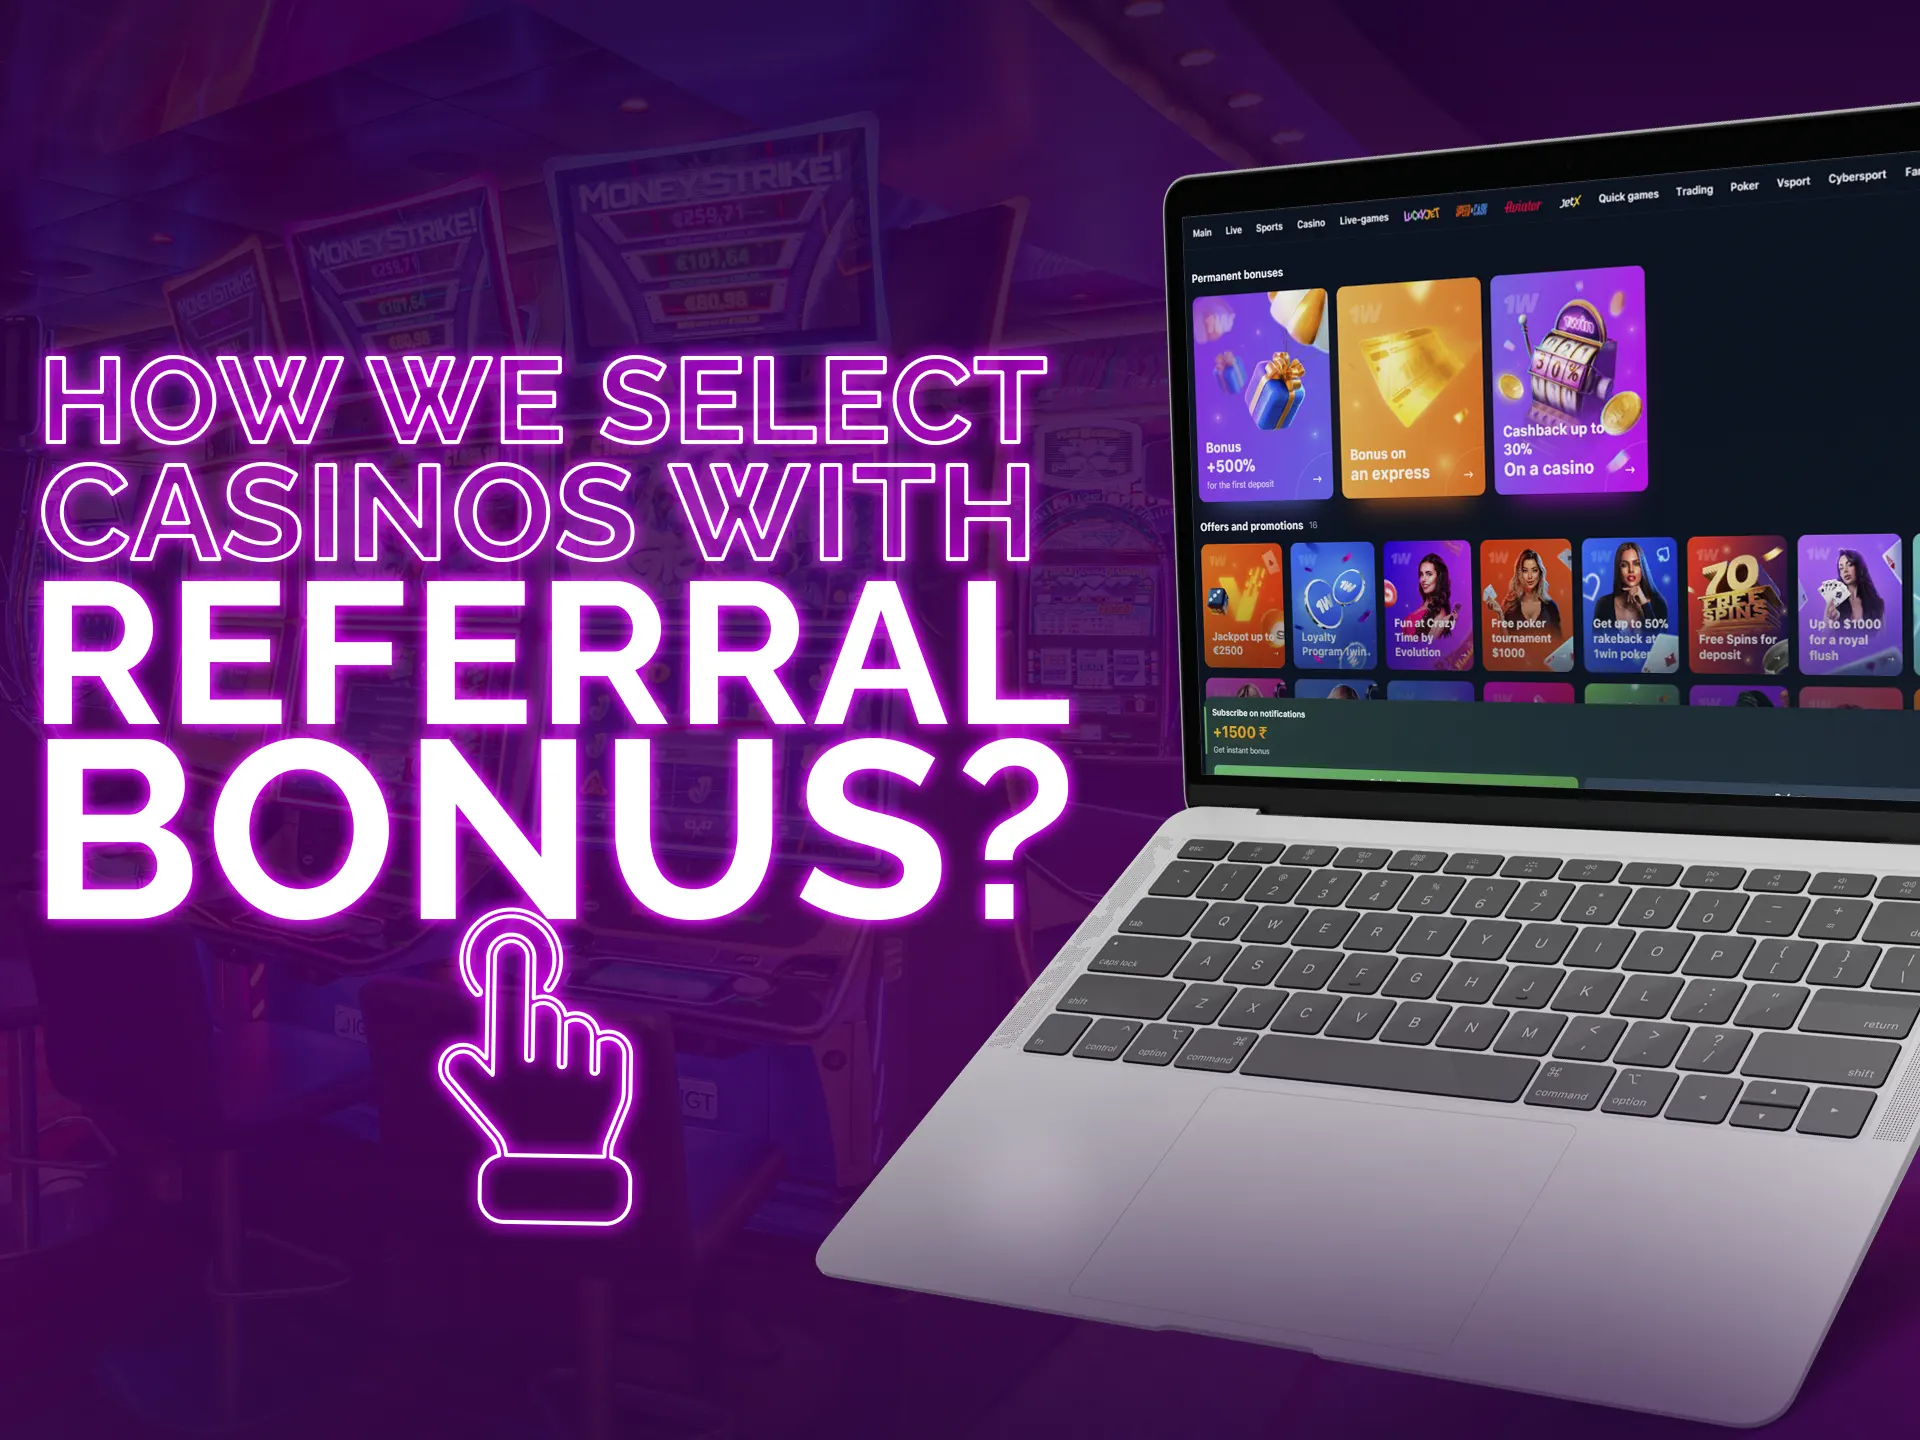 The ways how we selecting best casinos with referral bonuses.